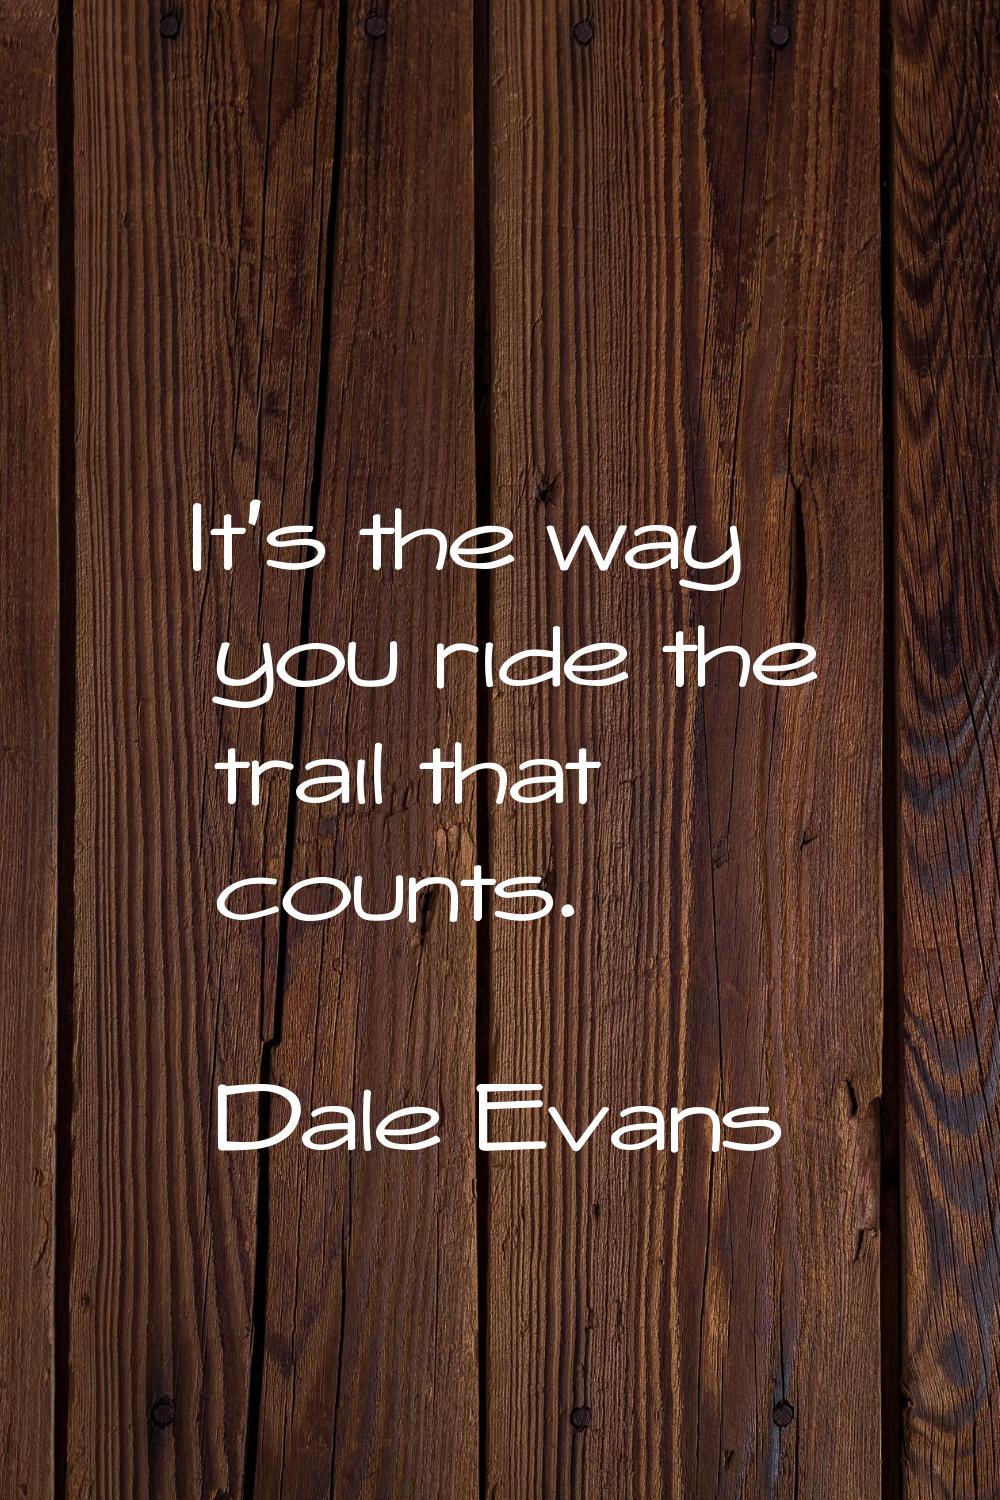 It's the way you ride the trail that counts.